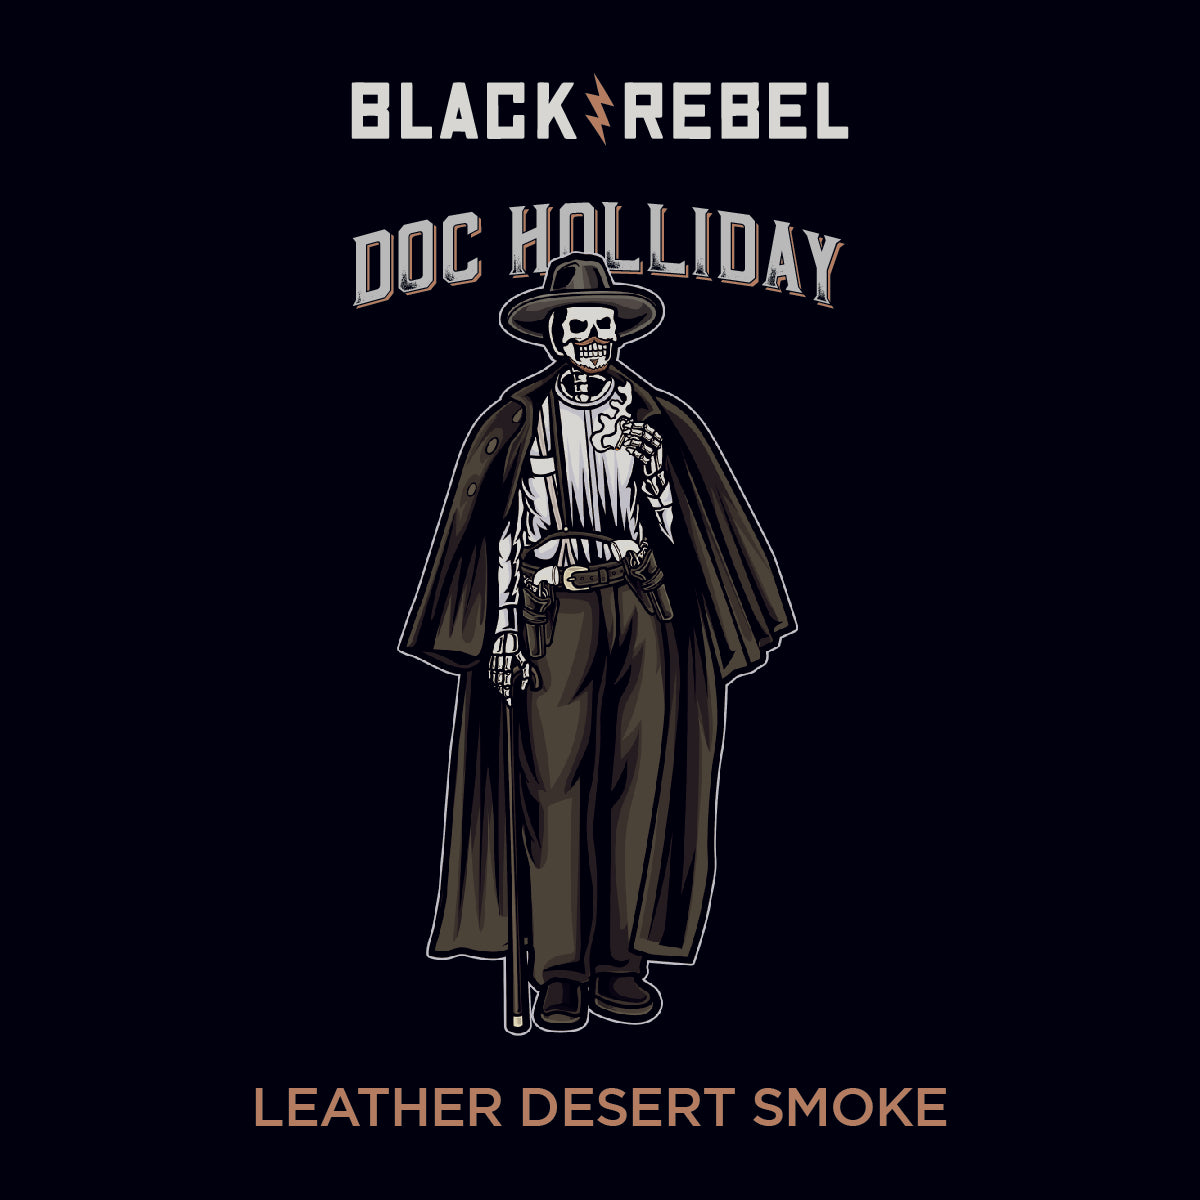 THE DOC HOLIDAY